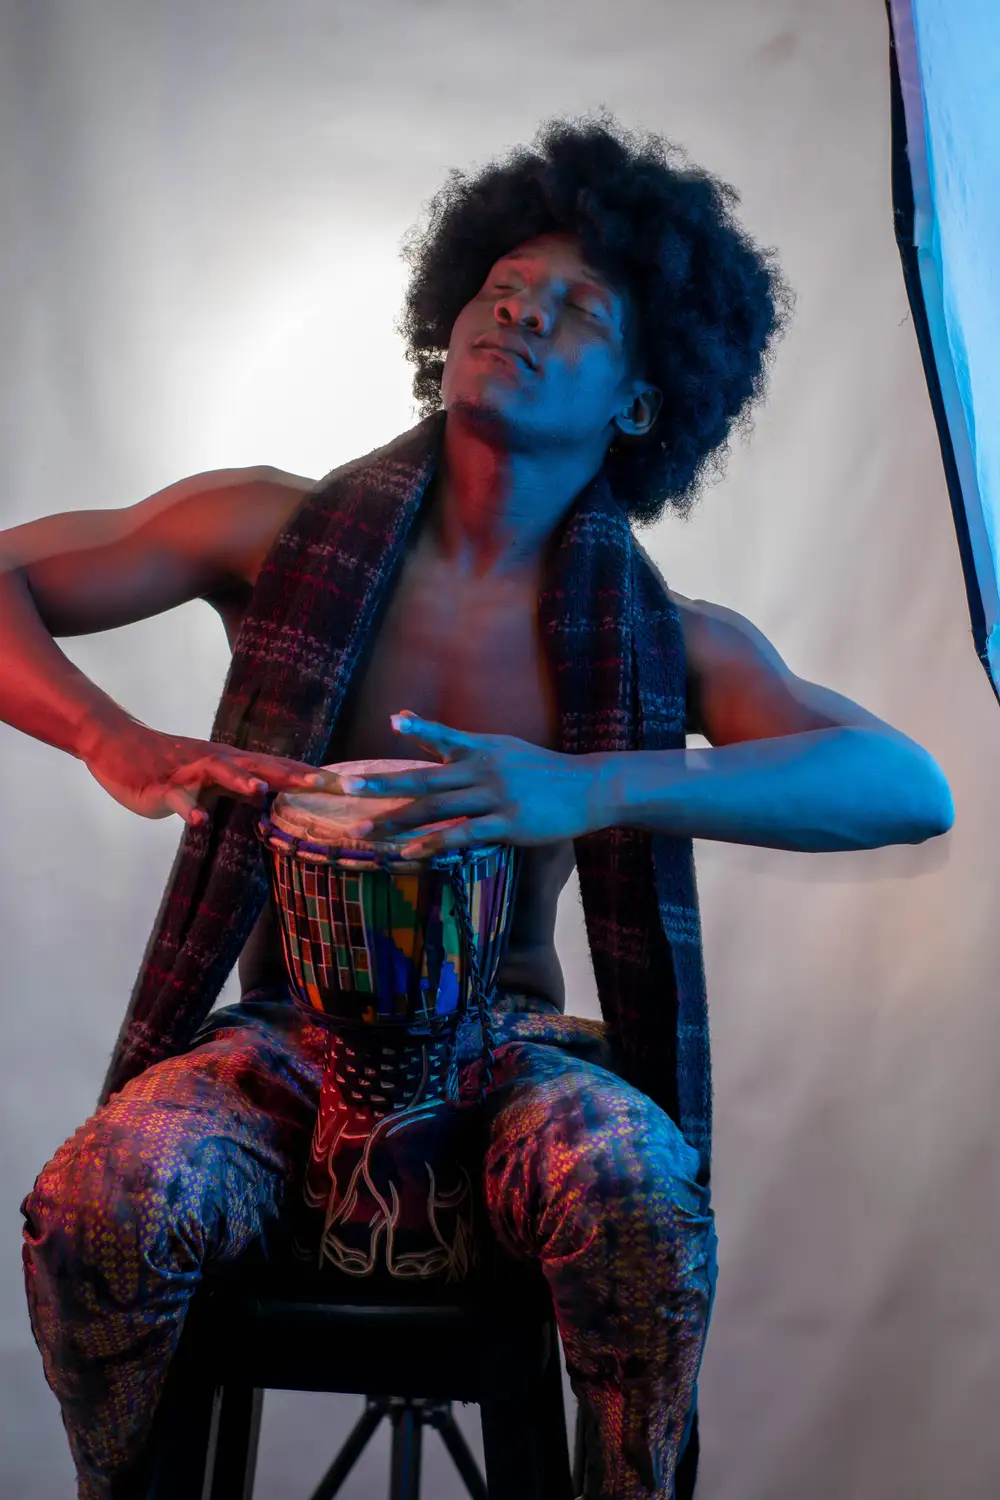 model on afro hairstyle enjoys playing his drum